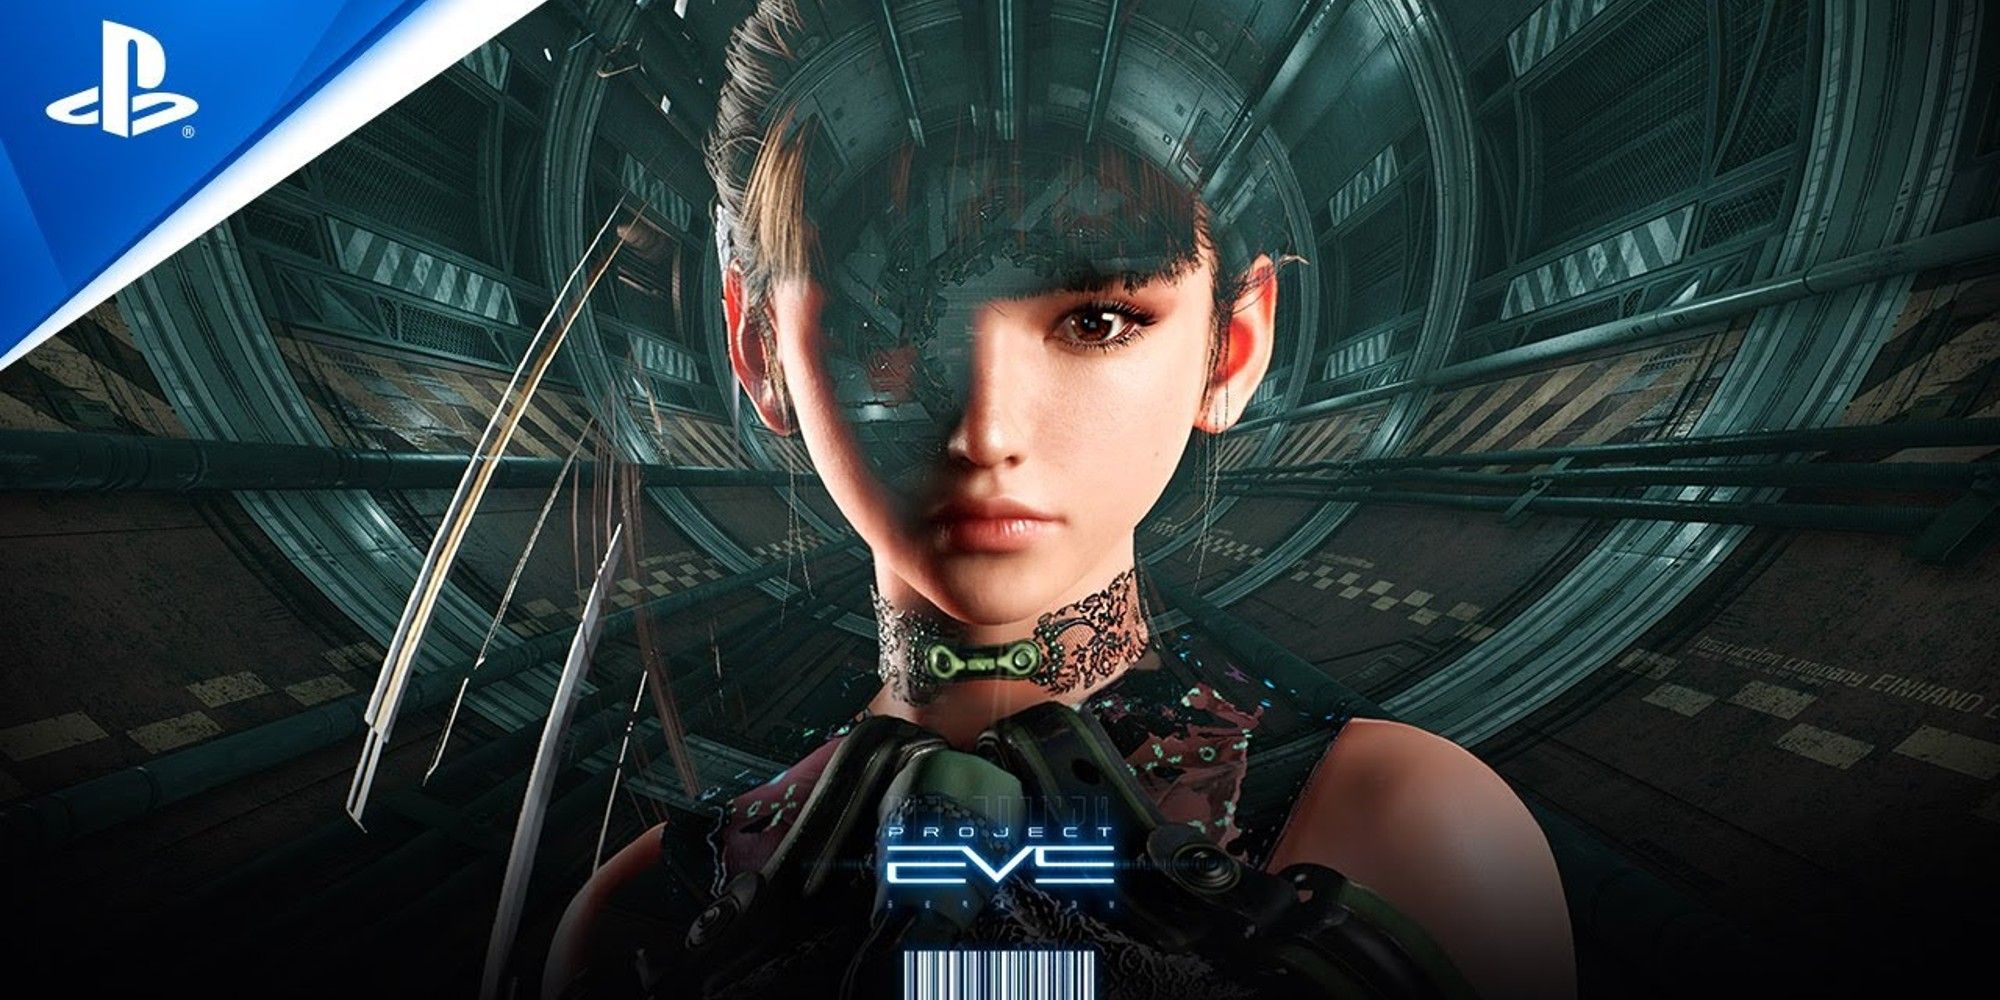 project eve